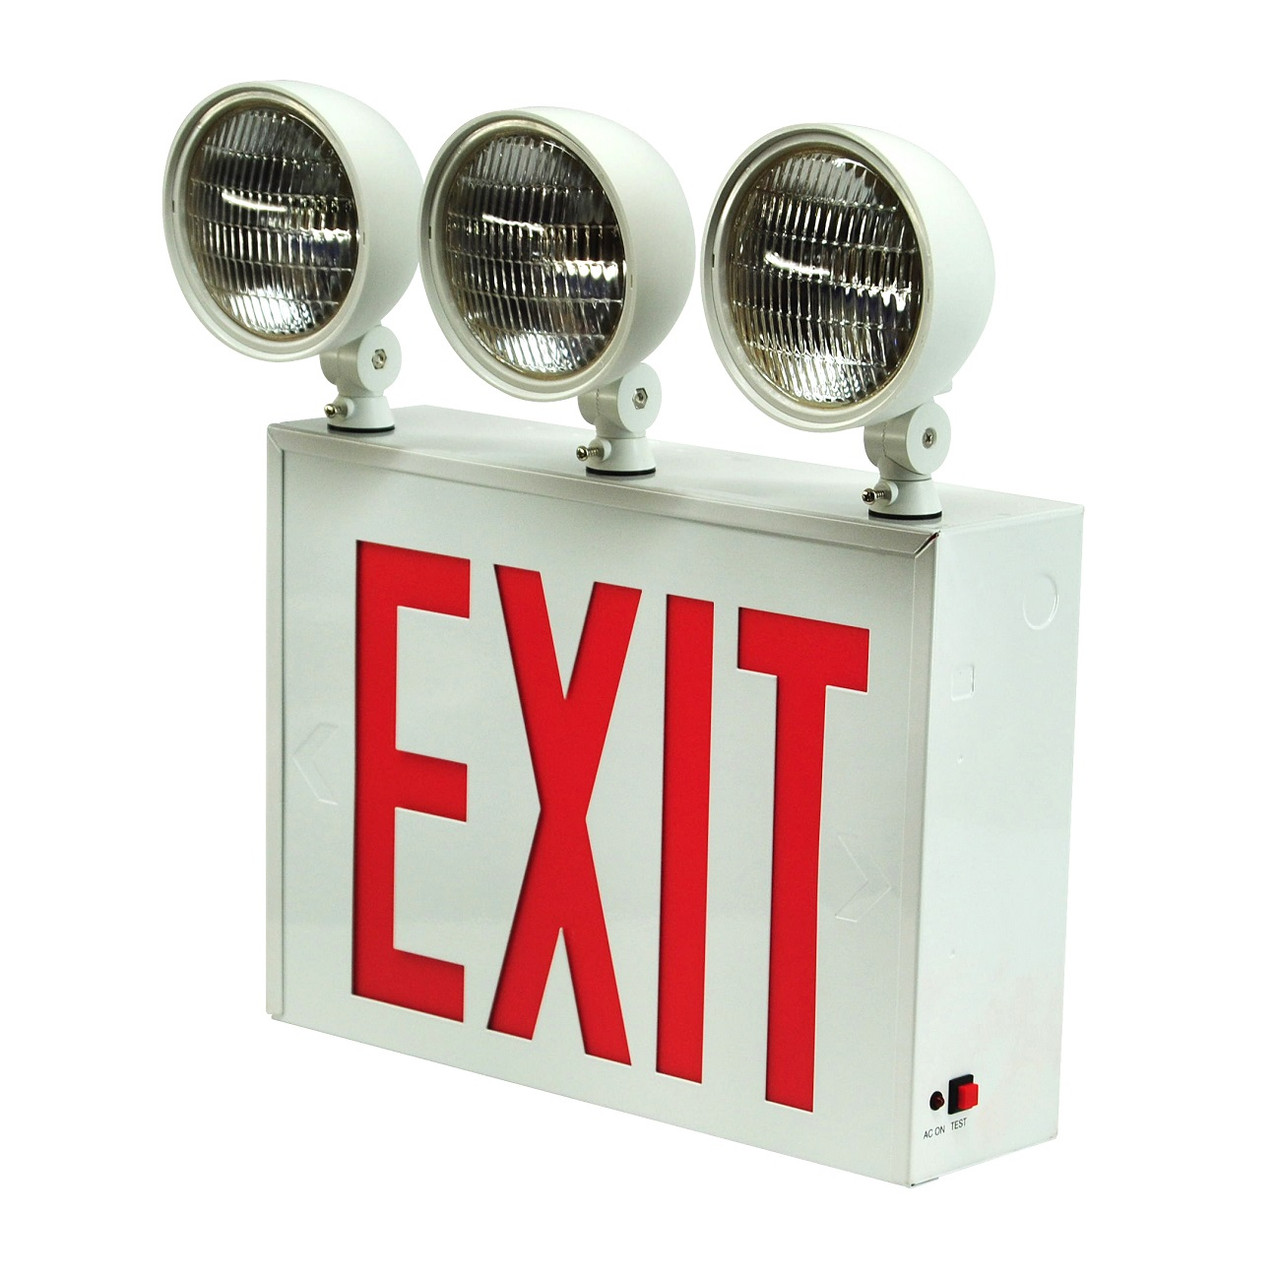 Two fully adjustable 12W, glare-free lamp heads with field installable 3rd emergency lighting head included.
Knockouts provided on sides of unit to relocate lamp heads.
High performance smooth metal reflector and glass lens for optimal light distribution.
Ultra bright, energy efficient, long life Red LED exit sign illumination.
New York City compliant 8" EXIT letters.
Dual 120V/277 voltage.
Charge rate/power “ON” LED indicator light and push-to-test switch for mandated code compliance testing.
LVD (low voltage disconnect) prevents battery from deep discharge.
6V maintenance-free, rechargeable sealed lead acid battery.
Internal solid-state transfer switch automatically connects the internal battery to LED board and LED lamp heads for minimum 90-minute emergency illumination.
Fully automatic solid-state, two rate charger initiates battery charging to recharge a discharged battery in 24 hours.
Mounting hardware provided for back surface wall mount.
Knockouts provided for conduit feed applications.